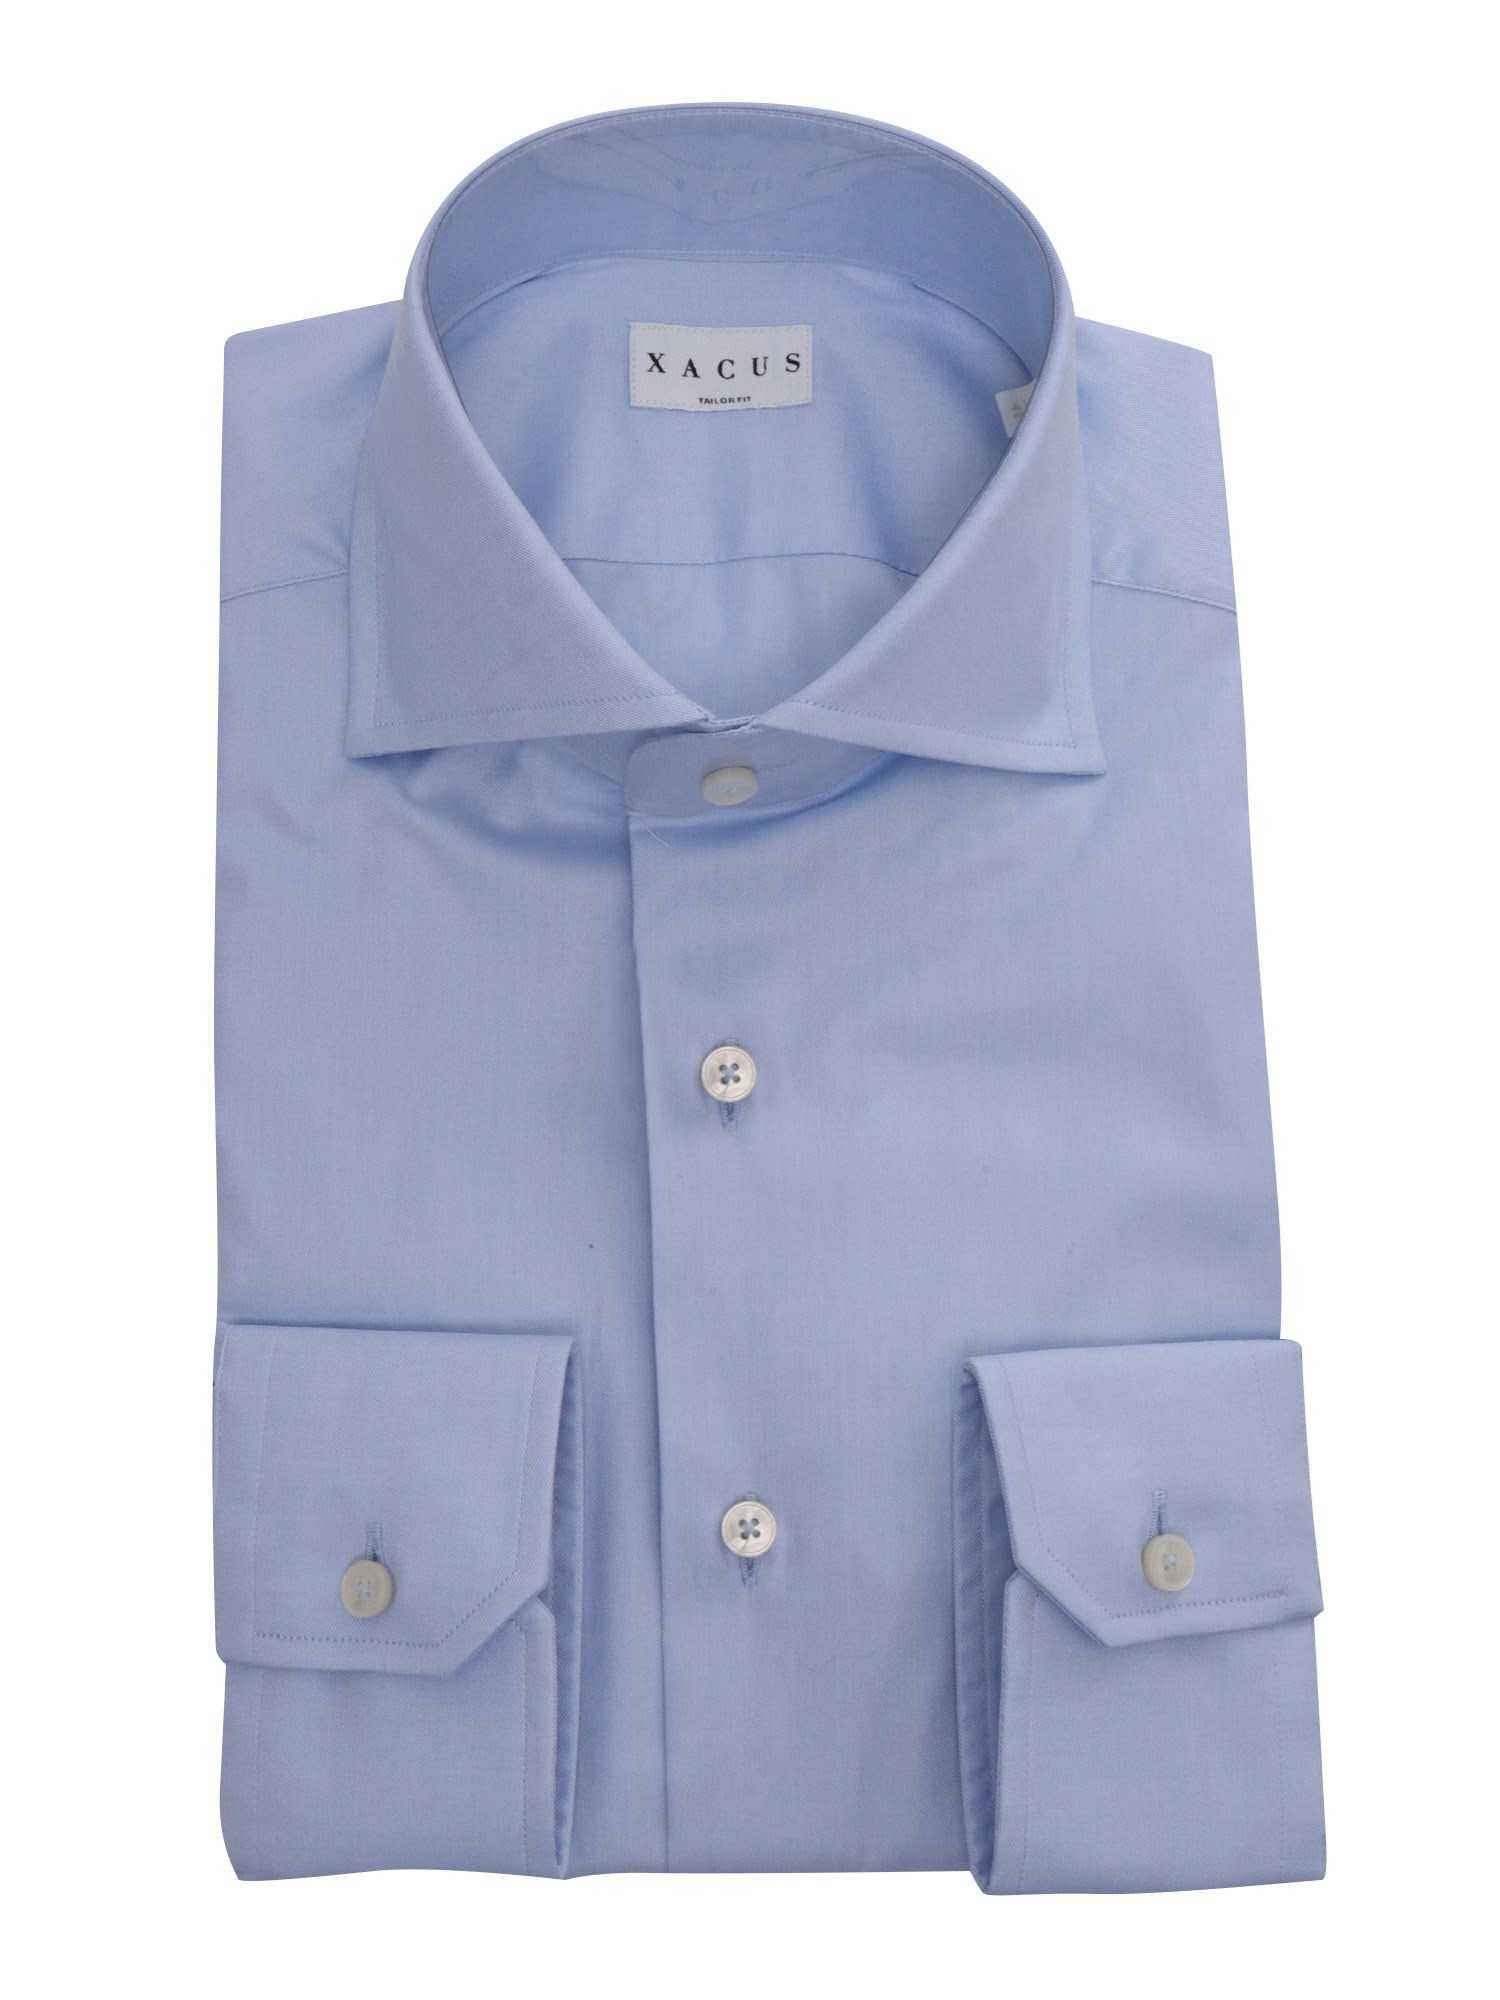 Xacus Light Blu Shirt With Pockets In Multi